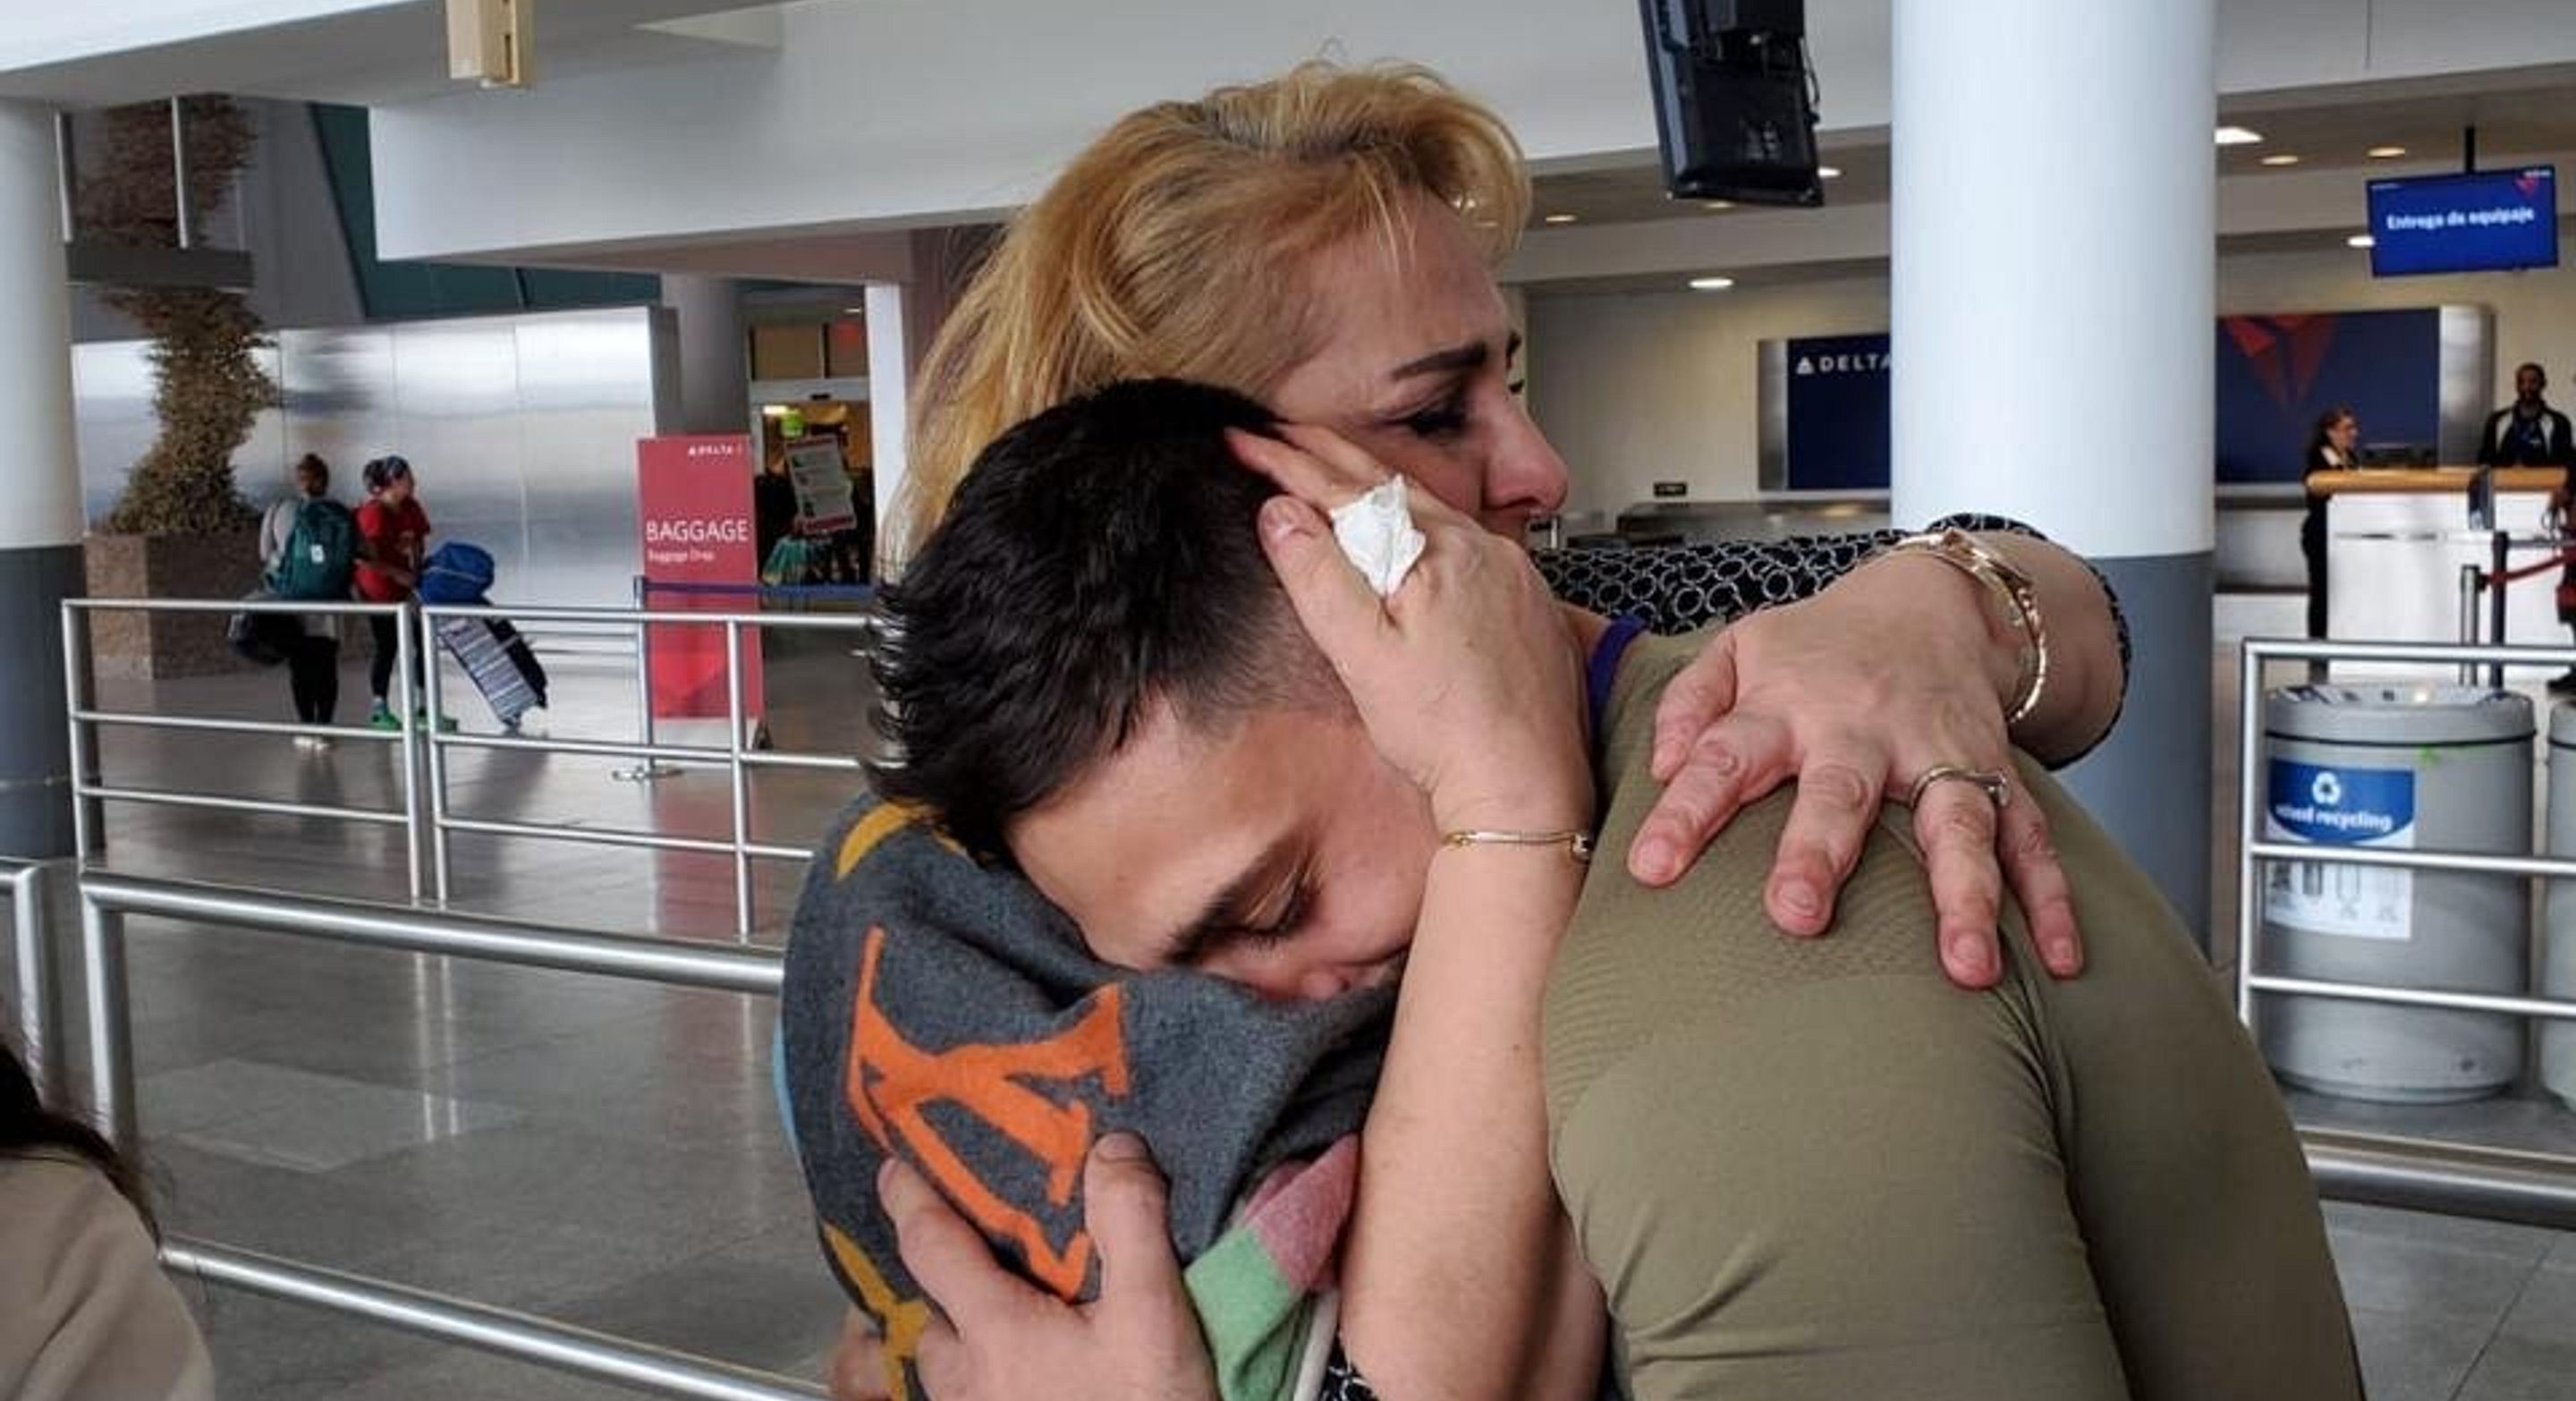 A Syrian mother embraces her son in an airport terminal. The mother has blonde hair and has tears in her eyes. The son nuzzles his face into her shoulder.